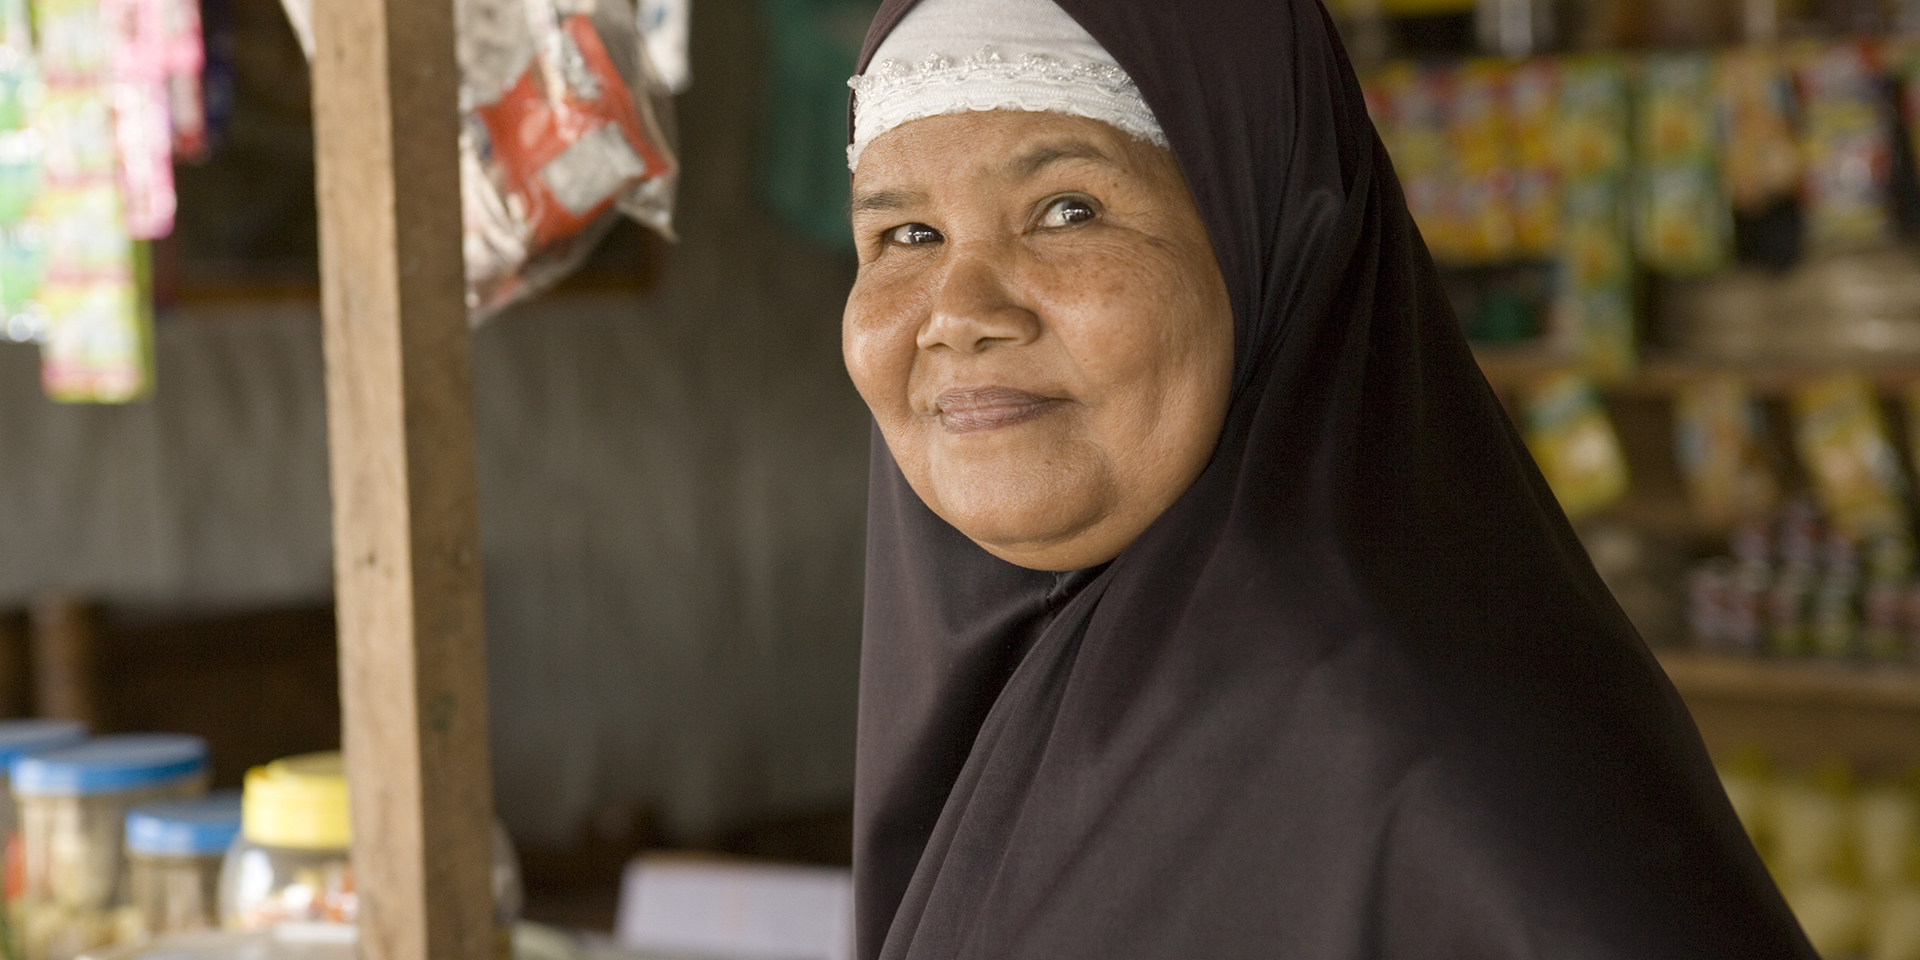 Image of a woman smiling as she stands in a market stall.